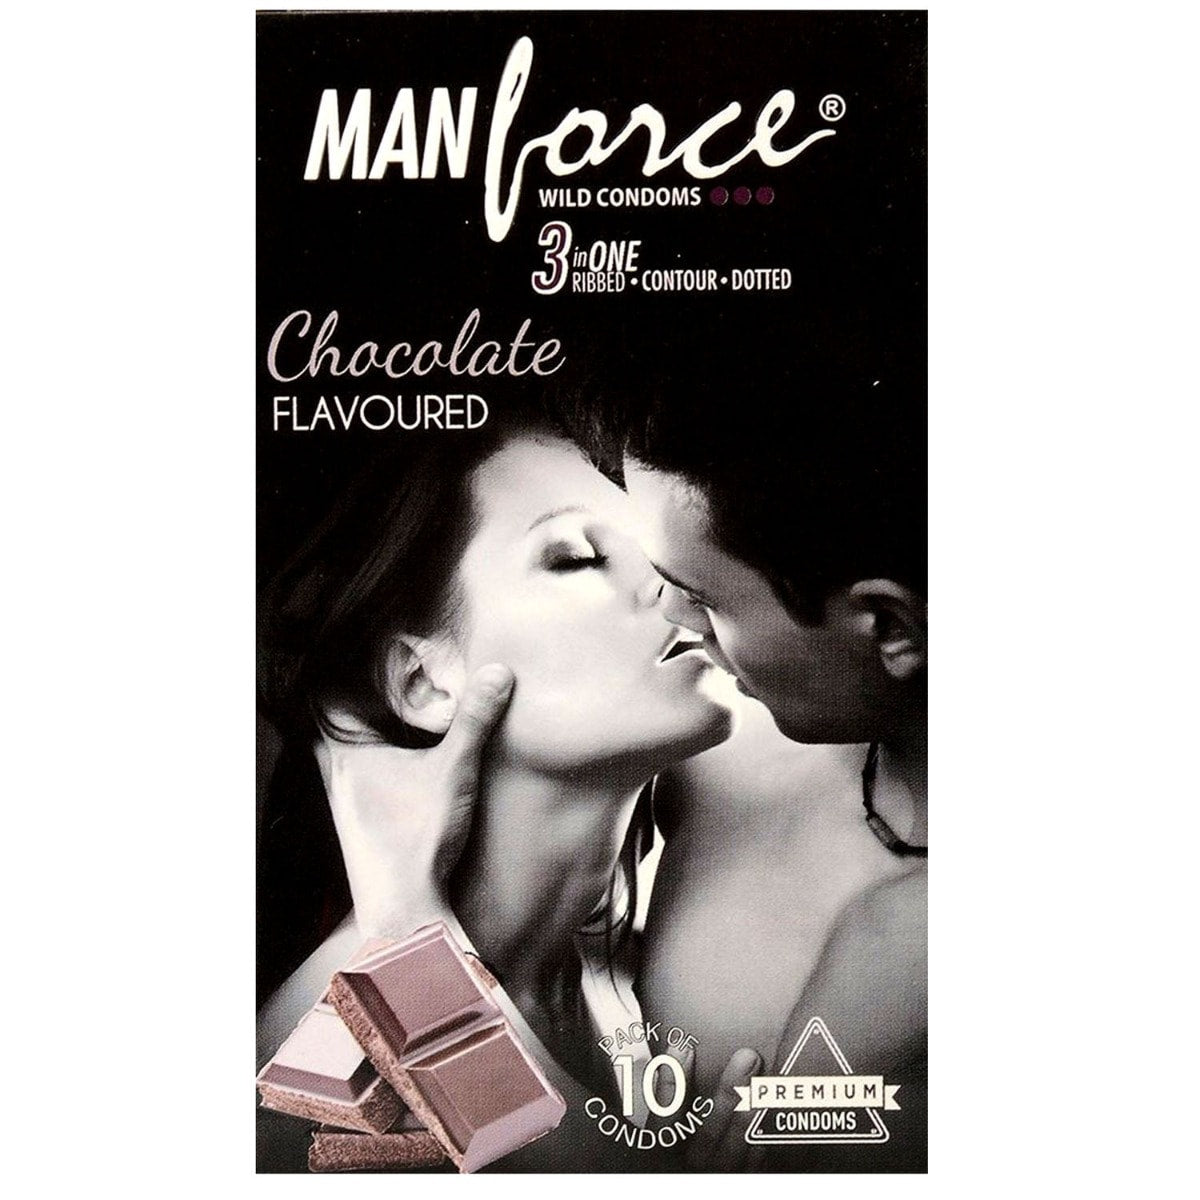 MANFORCE wild Condoms 3-one (Chocolate Flavored) (10pcs) (pack of 5)